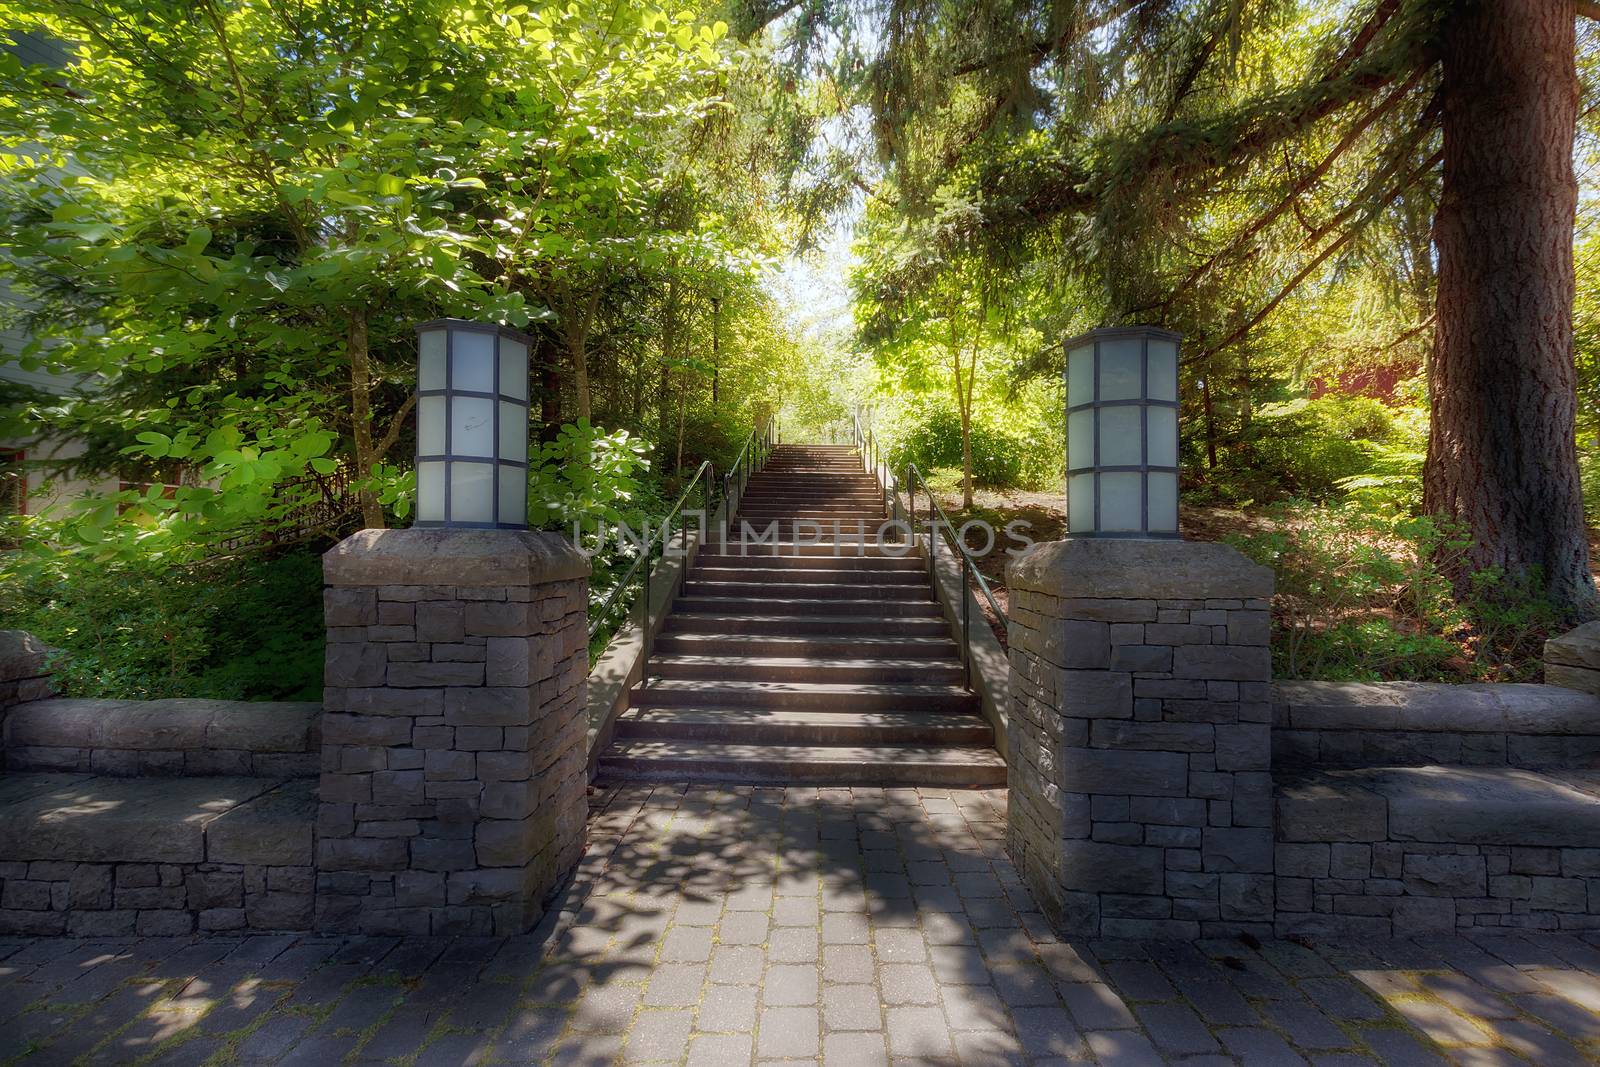 Garden path stone columns bench stairs paver bricks walkway and lamp posts in lush greenery in the park